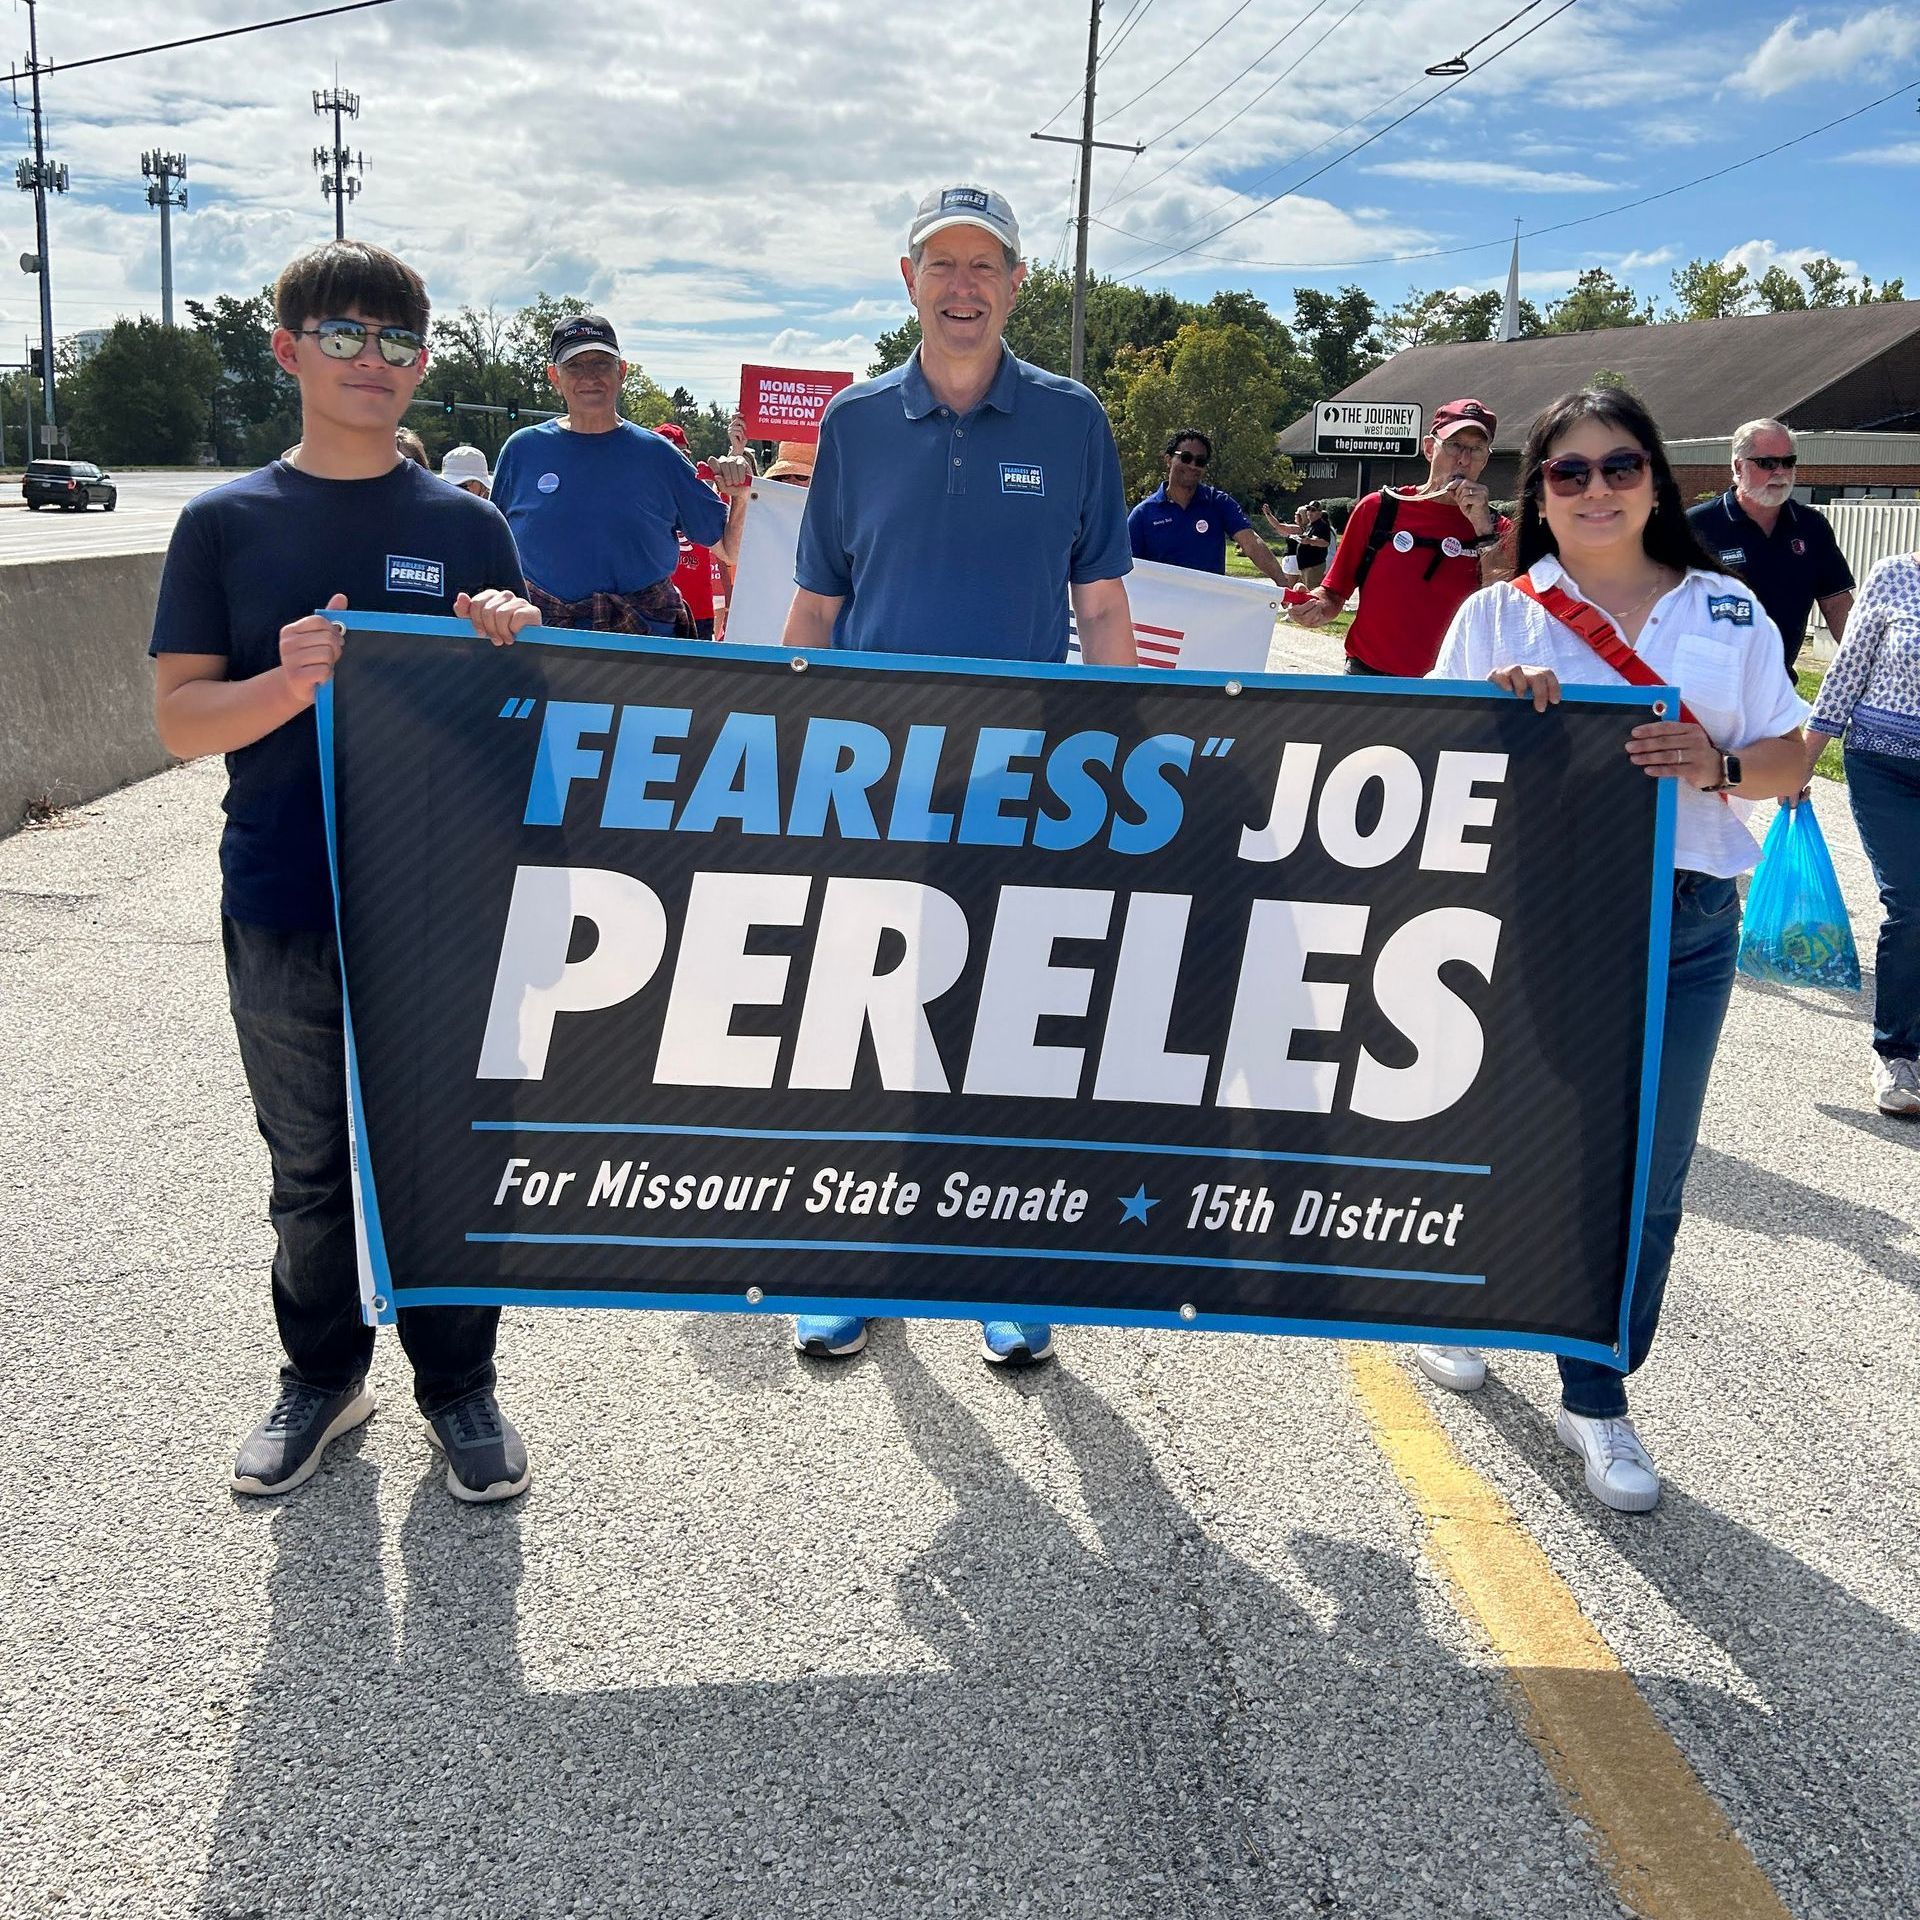 Joe Pereles and supporters at a parade holding a sign that says fearless joe pereles